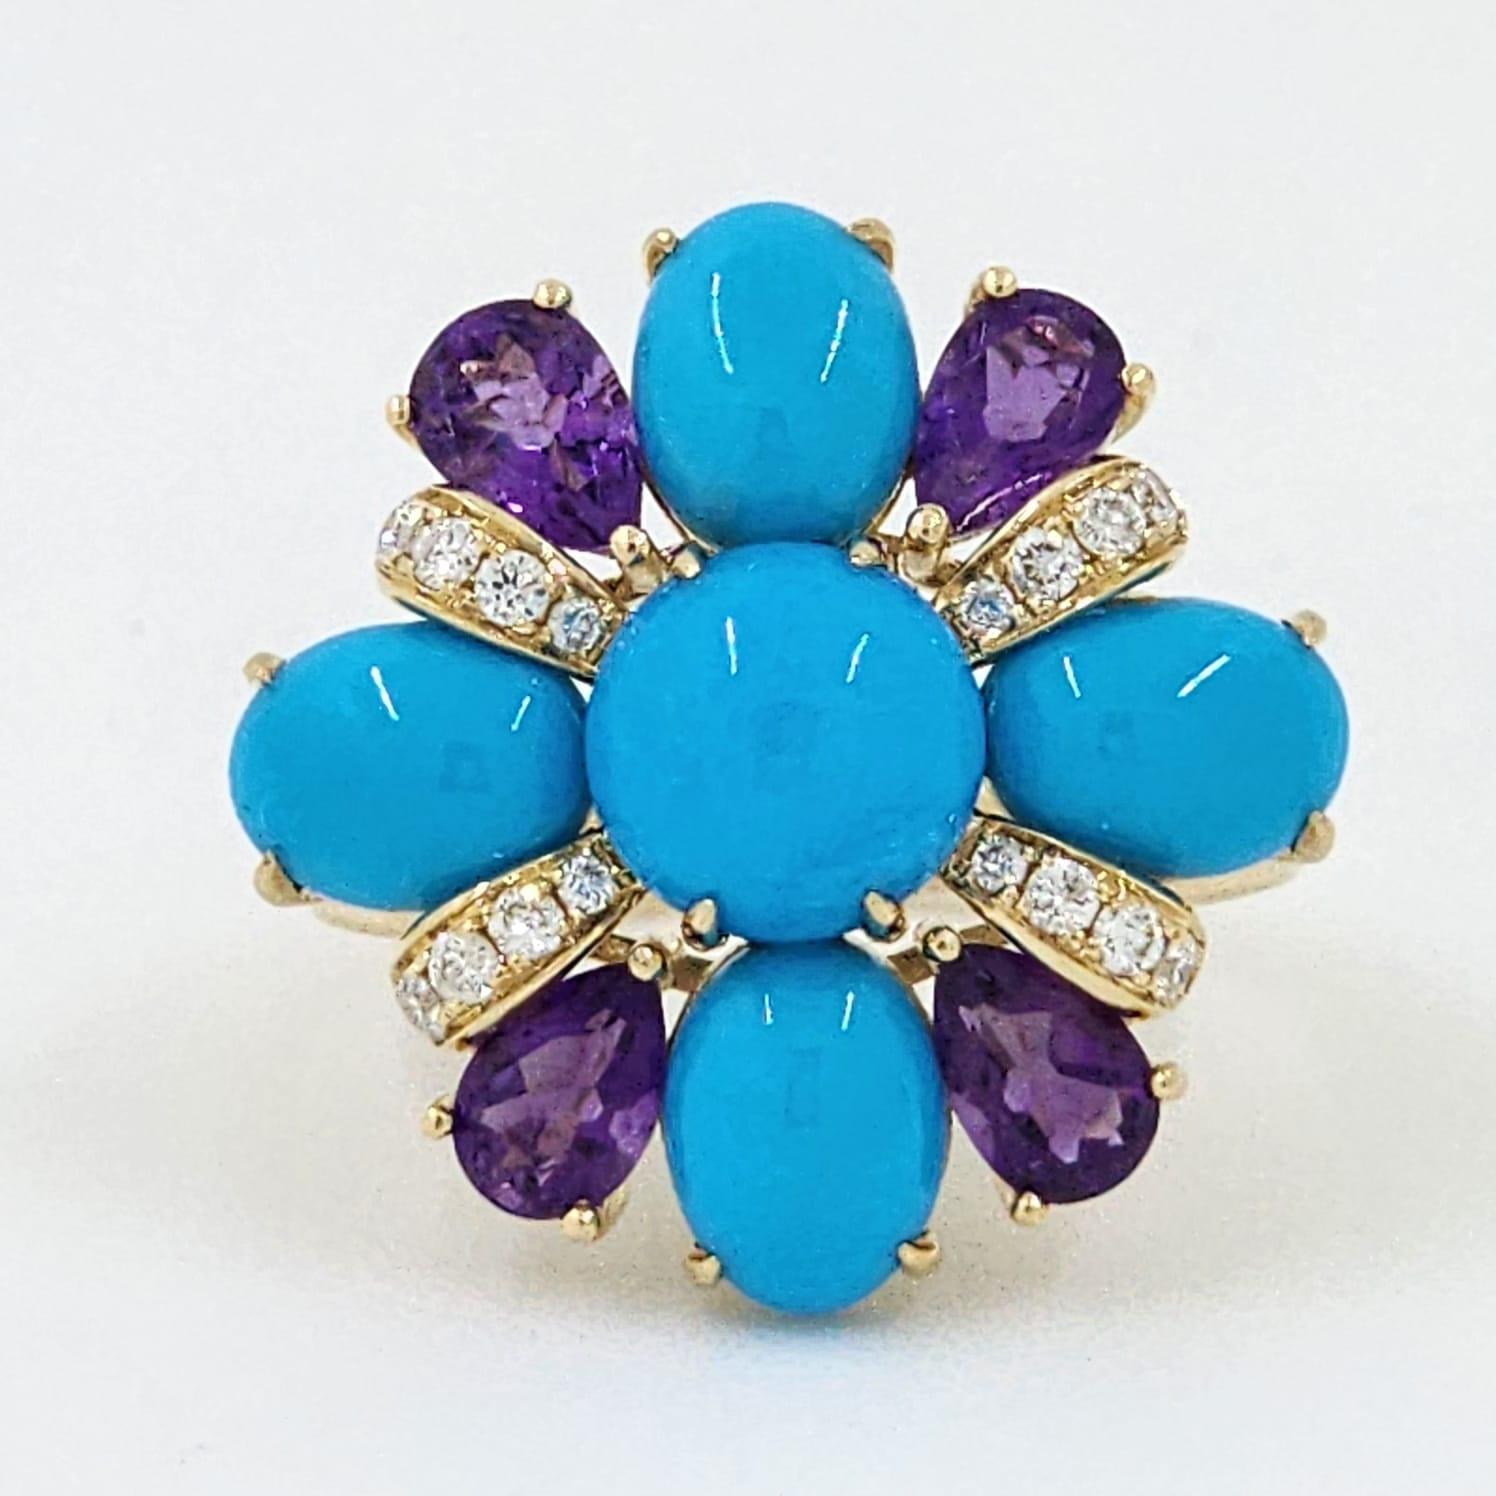 Vintage Sleeping Beauty Turquoise Amethyst and Diamond Ring in 14 Karat Gold For Sale 1